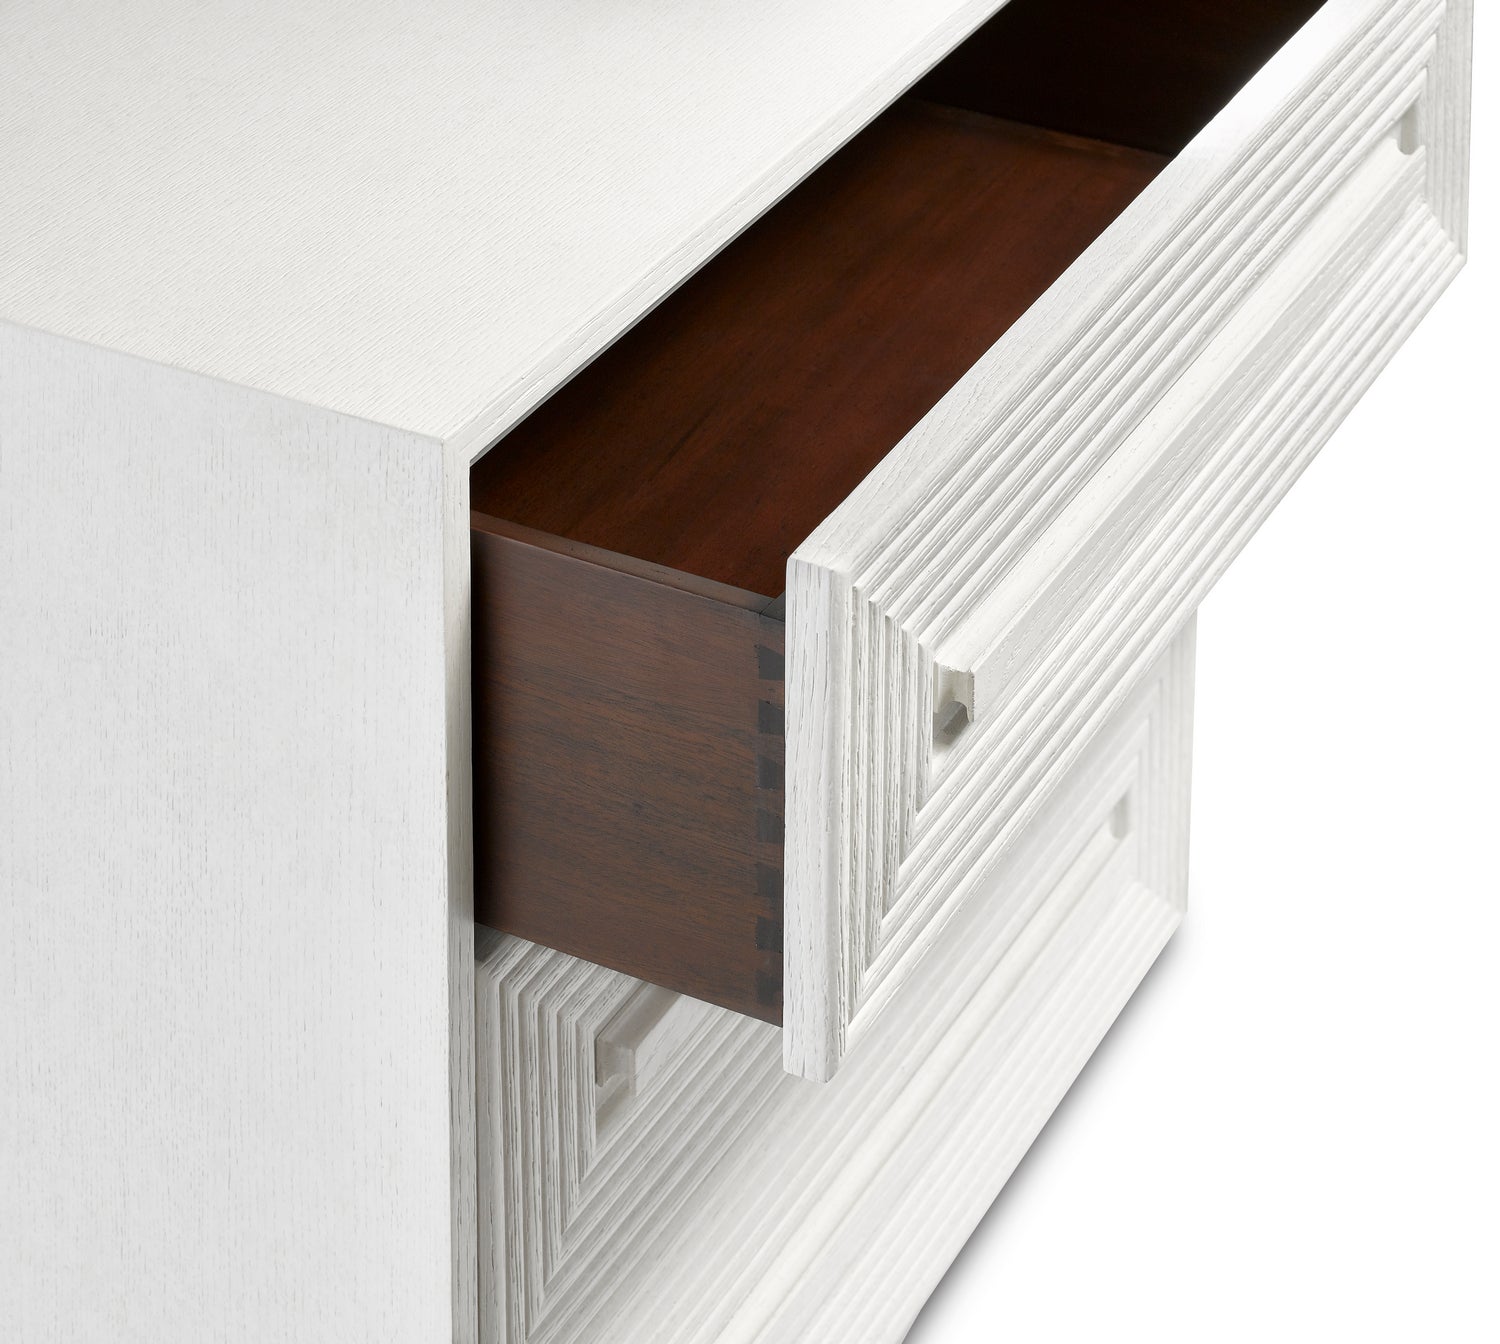 Chest from the Morombe collection in Cerused White finish